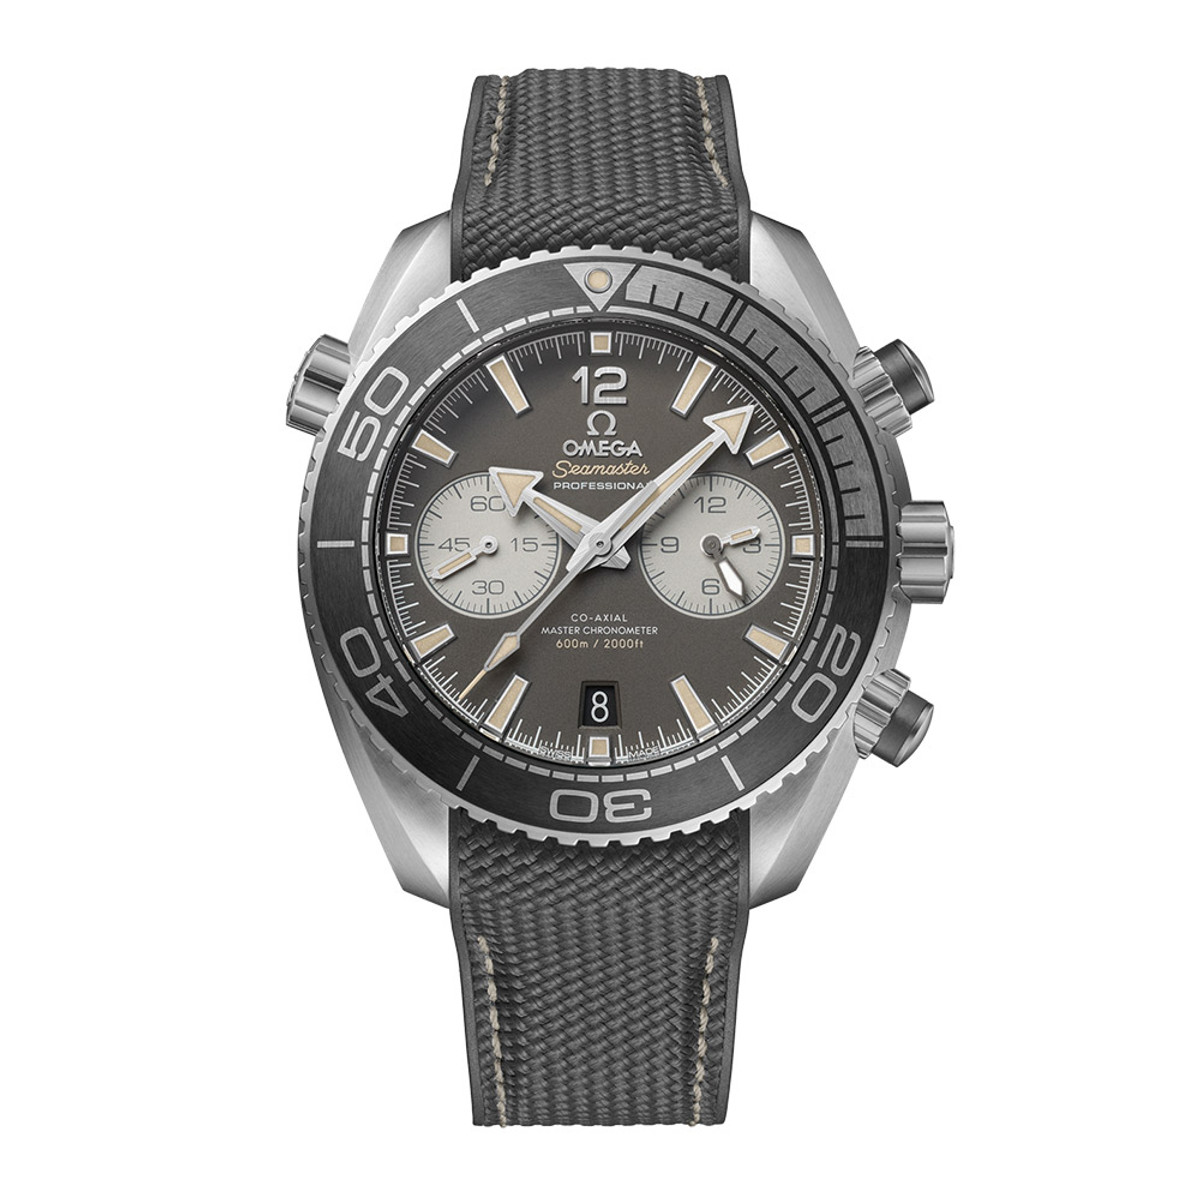 Omega Seamaster Planet Ocean 600M Chronograph 45.5mm 215.32.46.51.01.004-61591 Product Image